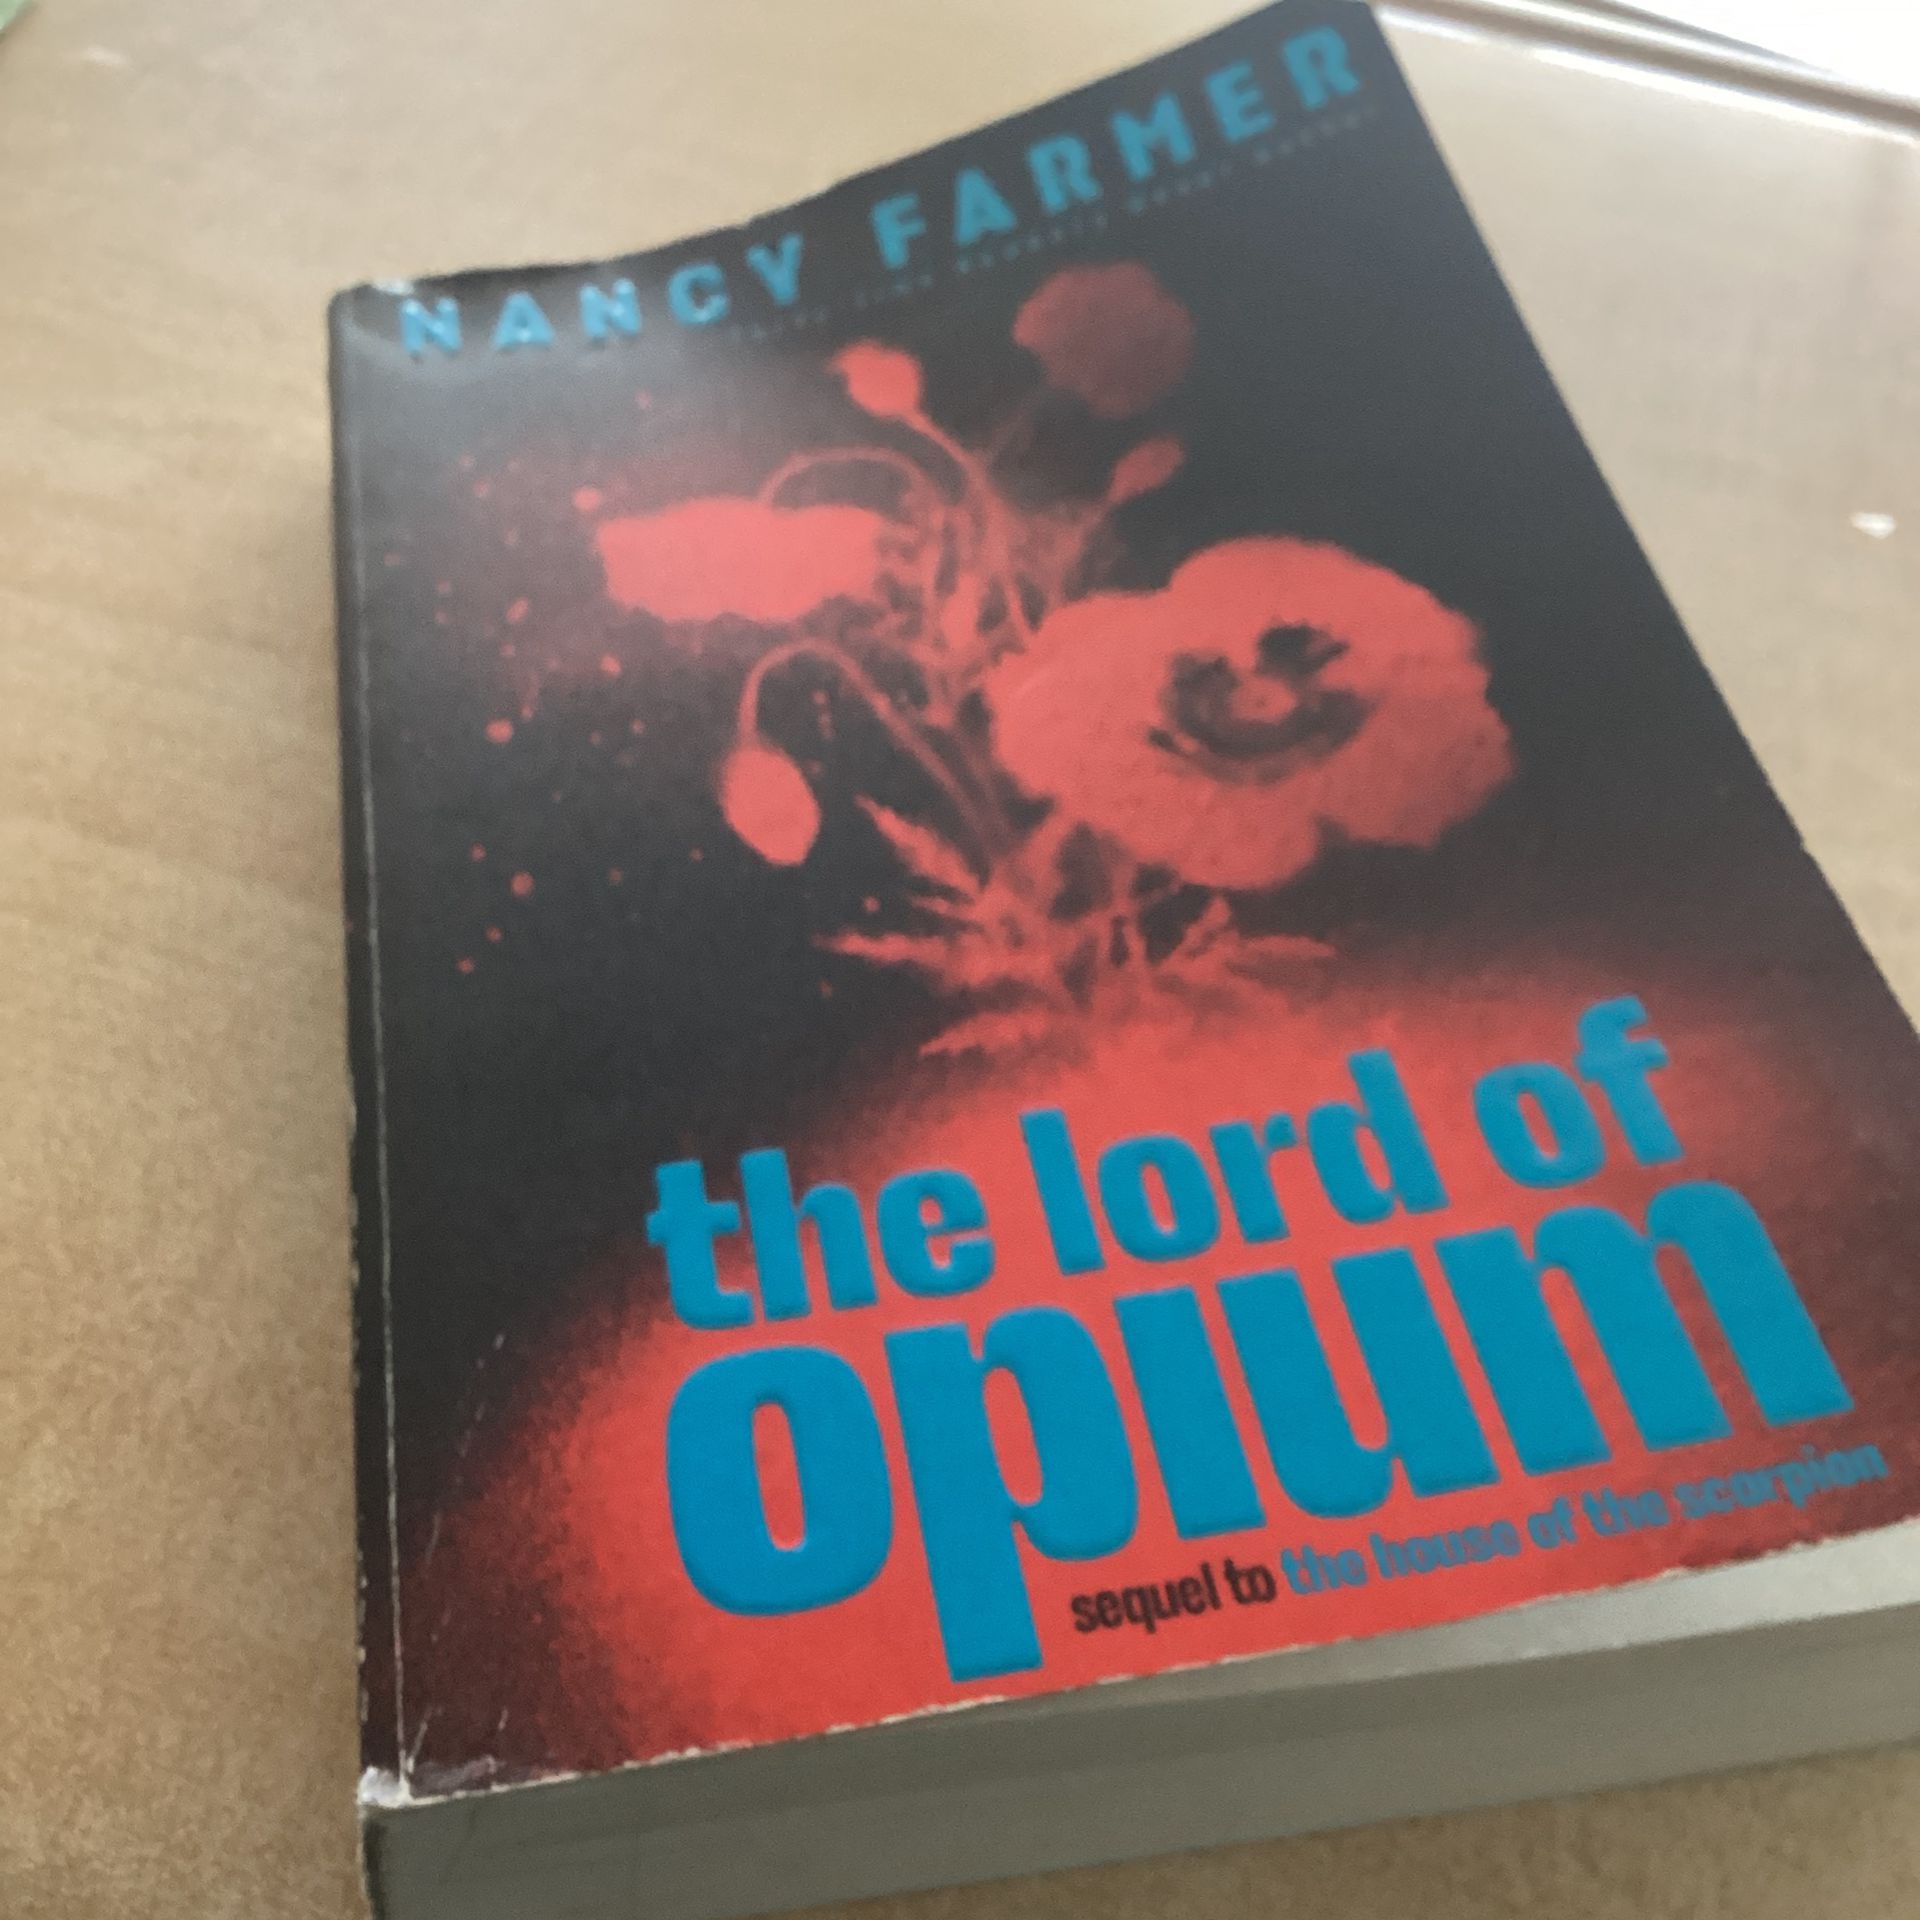 A Book The Lord Of Opium